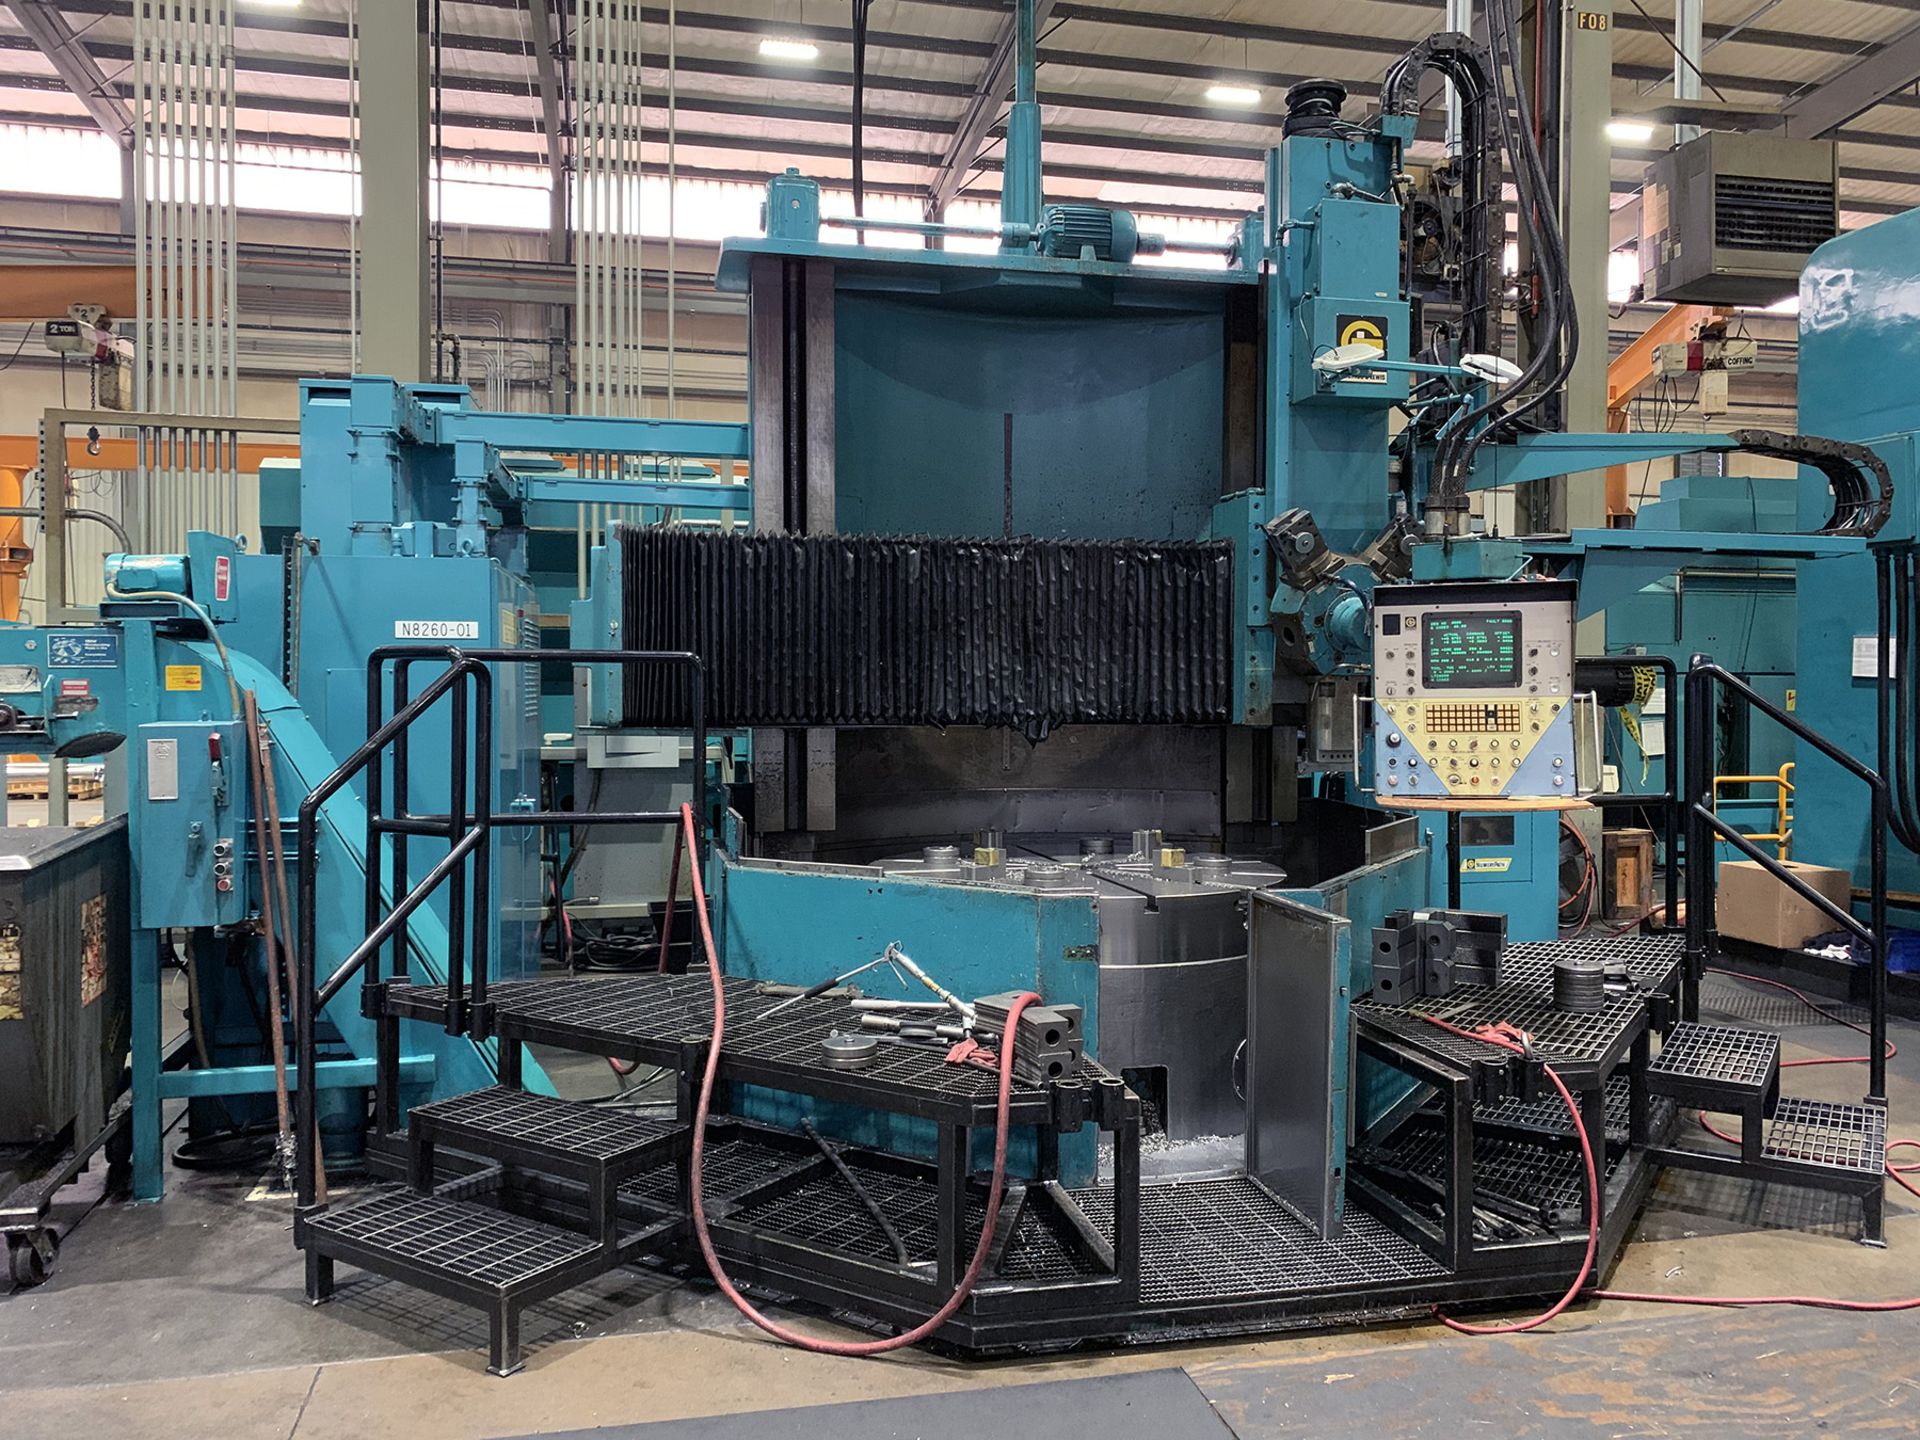 60" Giddings & Lewis CNC Vertical Boring Mill, new 1982, 60" table dia., 4-jaw comb. Ind./Univ.